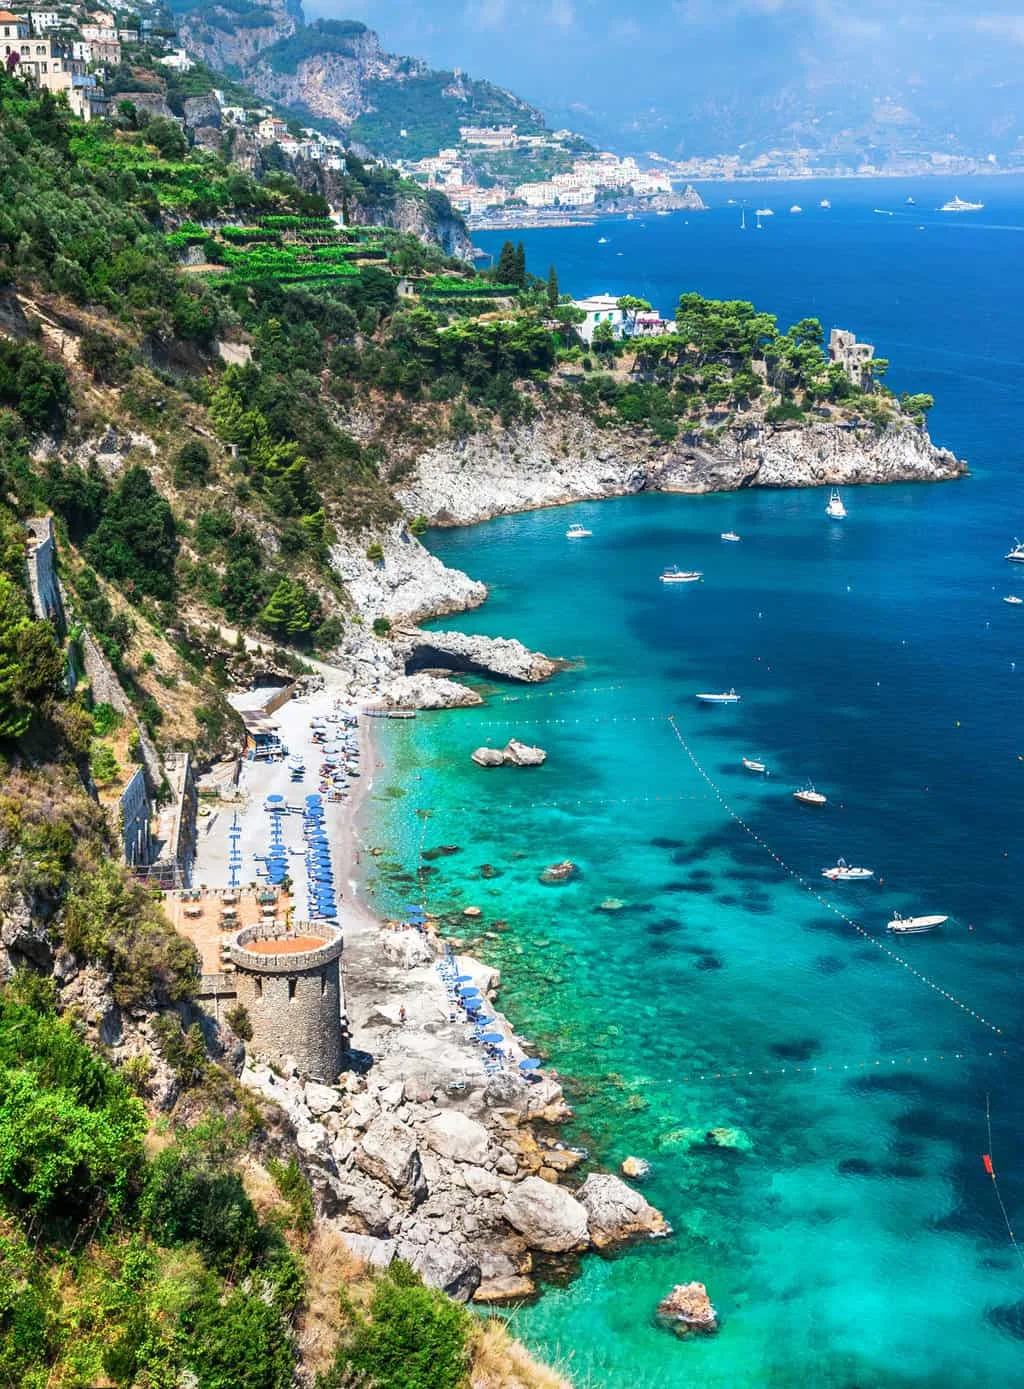 Bright turquoise sea with boats moored in front of a small beach on the rugged coast of the Amalfi.